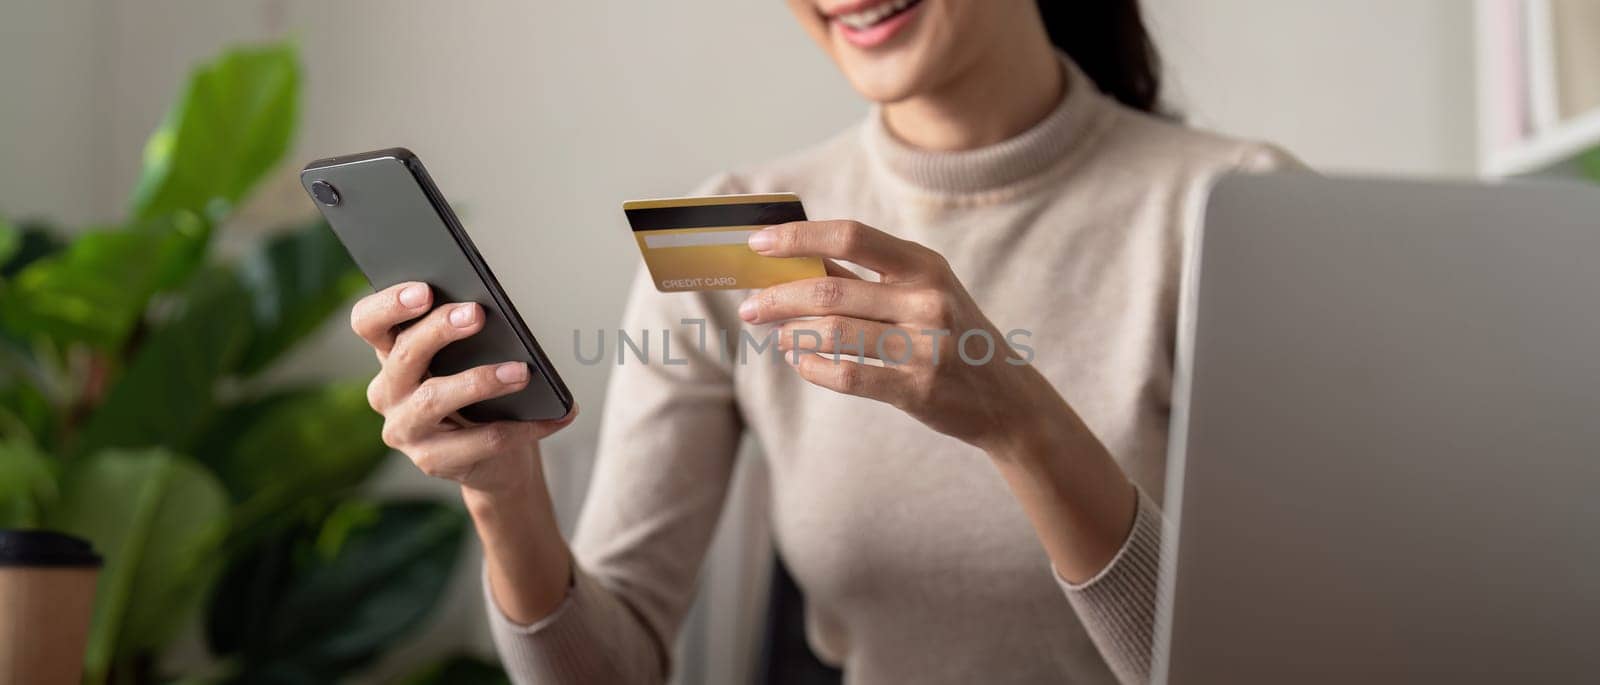 Asian female holding smartphone and credit card, using mobile banking app or online shopping app by nateemee